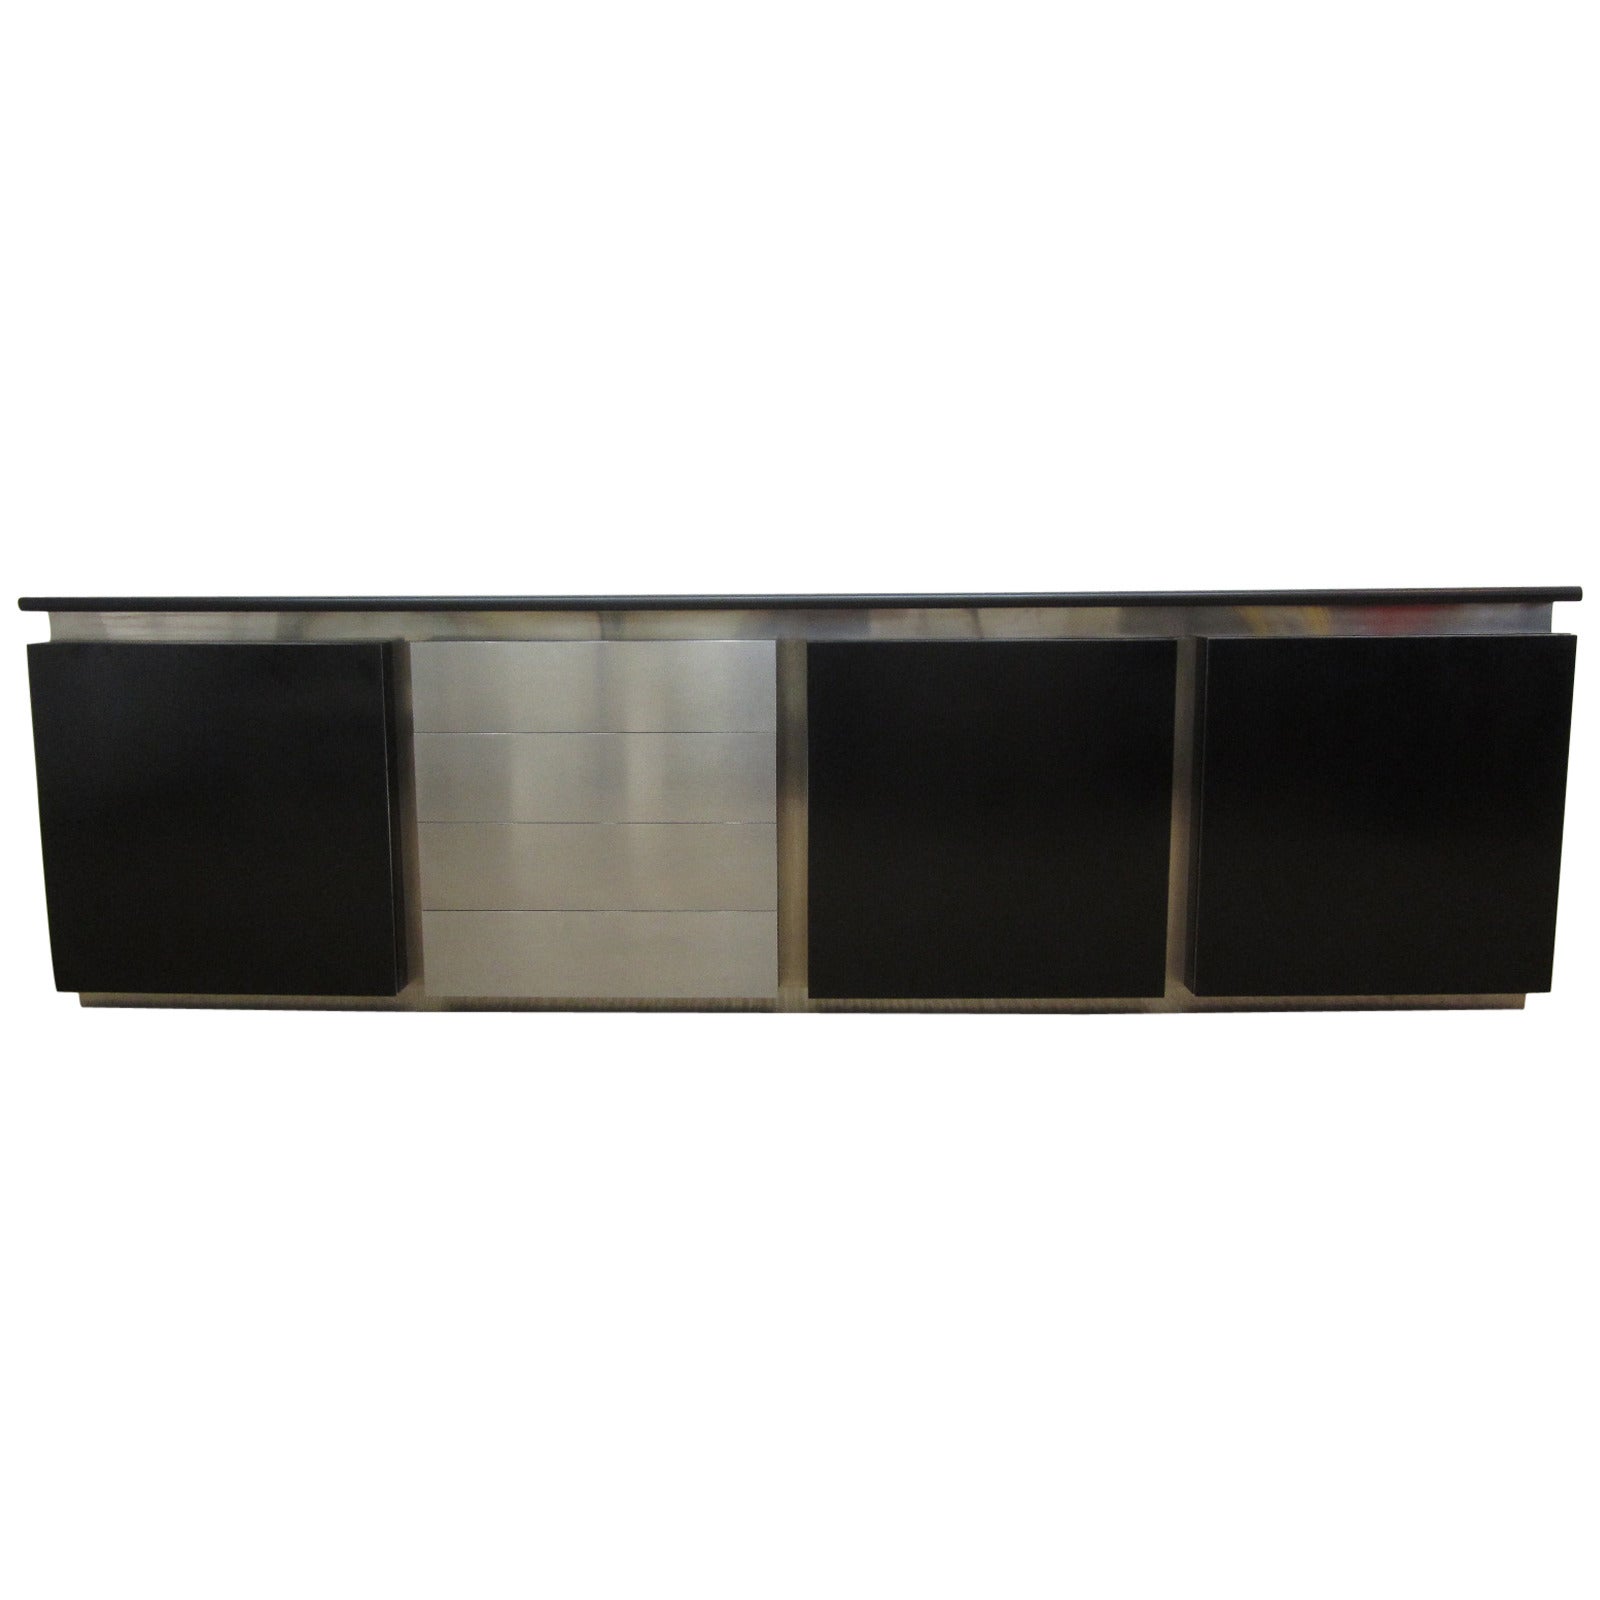 Ludovico Acerbis Steel and Blackened-Oak Sideboard, Italy, 1977 For Sale